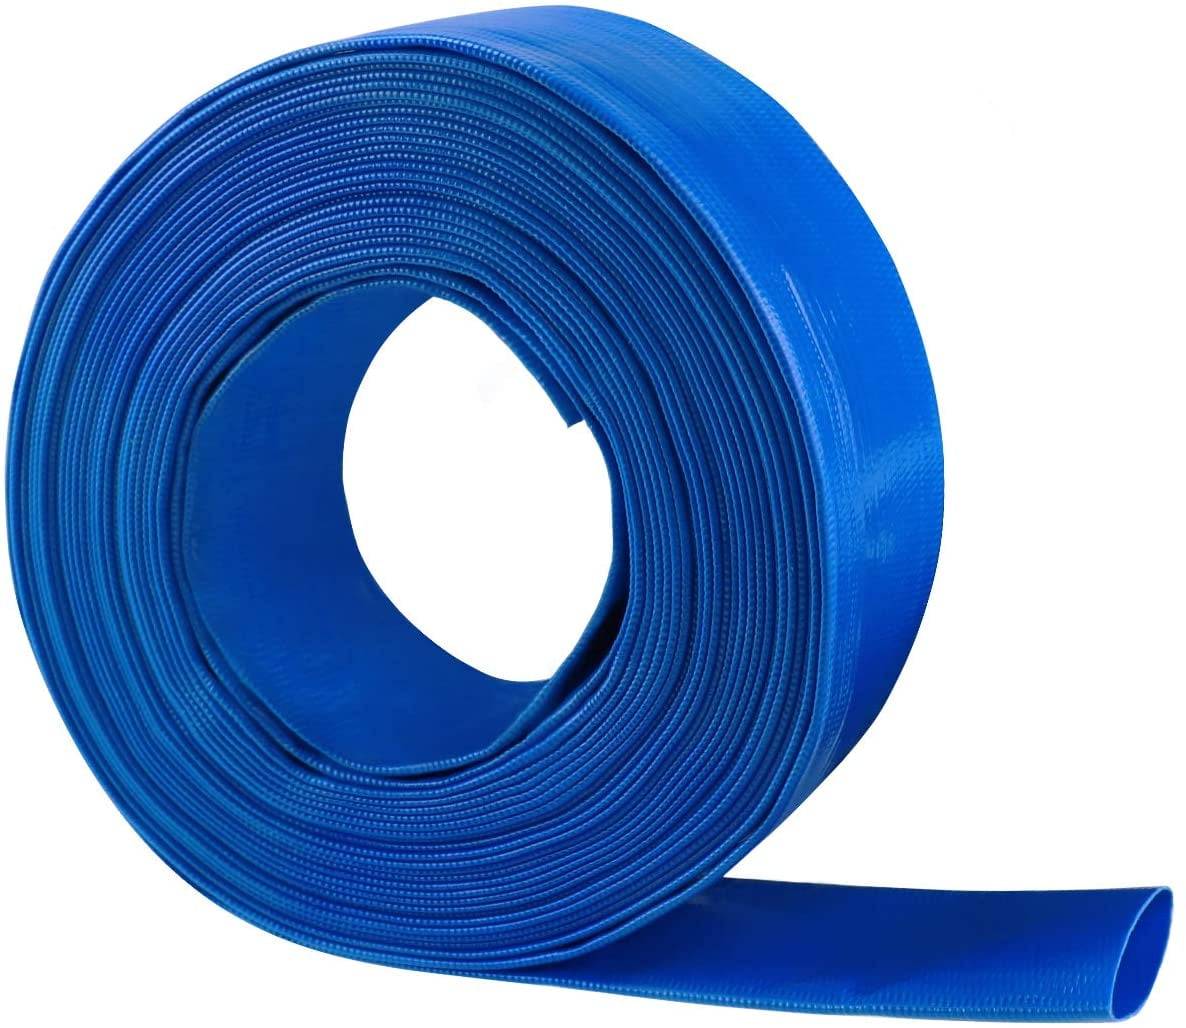 Pond Construction 3" x 50' Blue Discharge Hose w/ Camlock Fittings Dewatering 